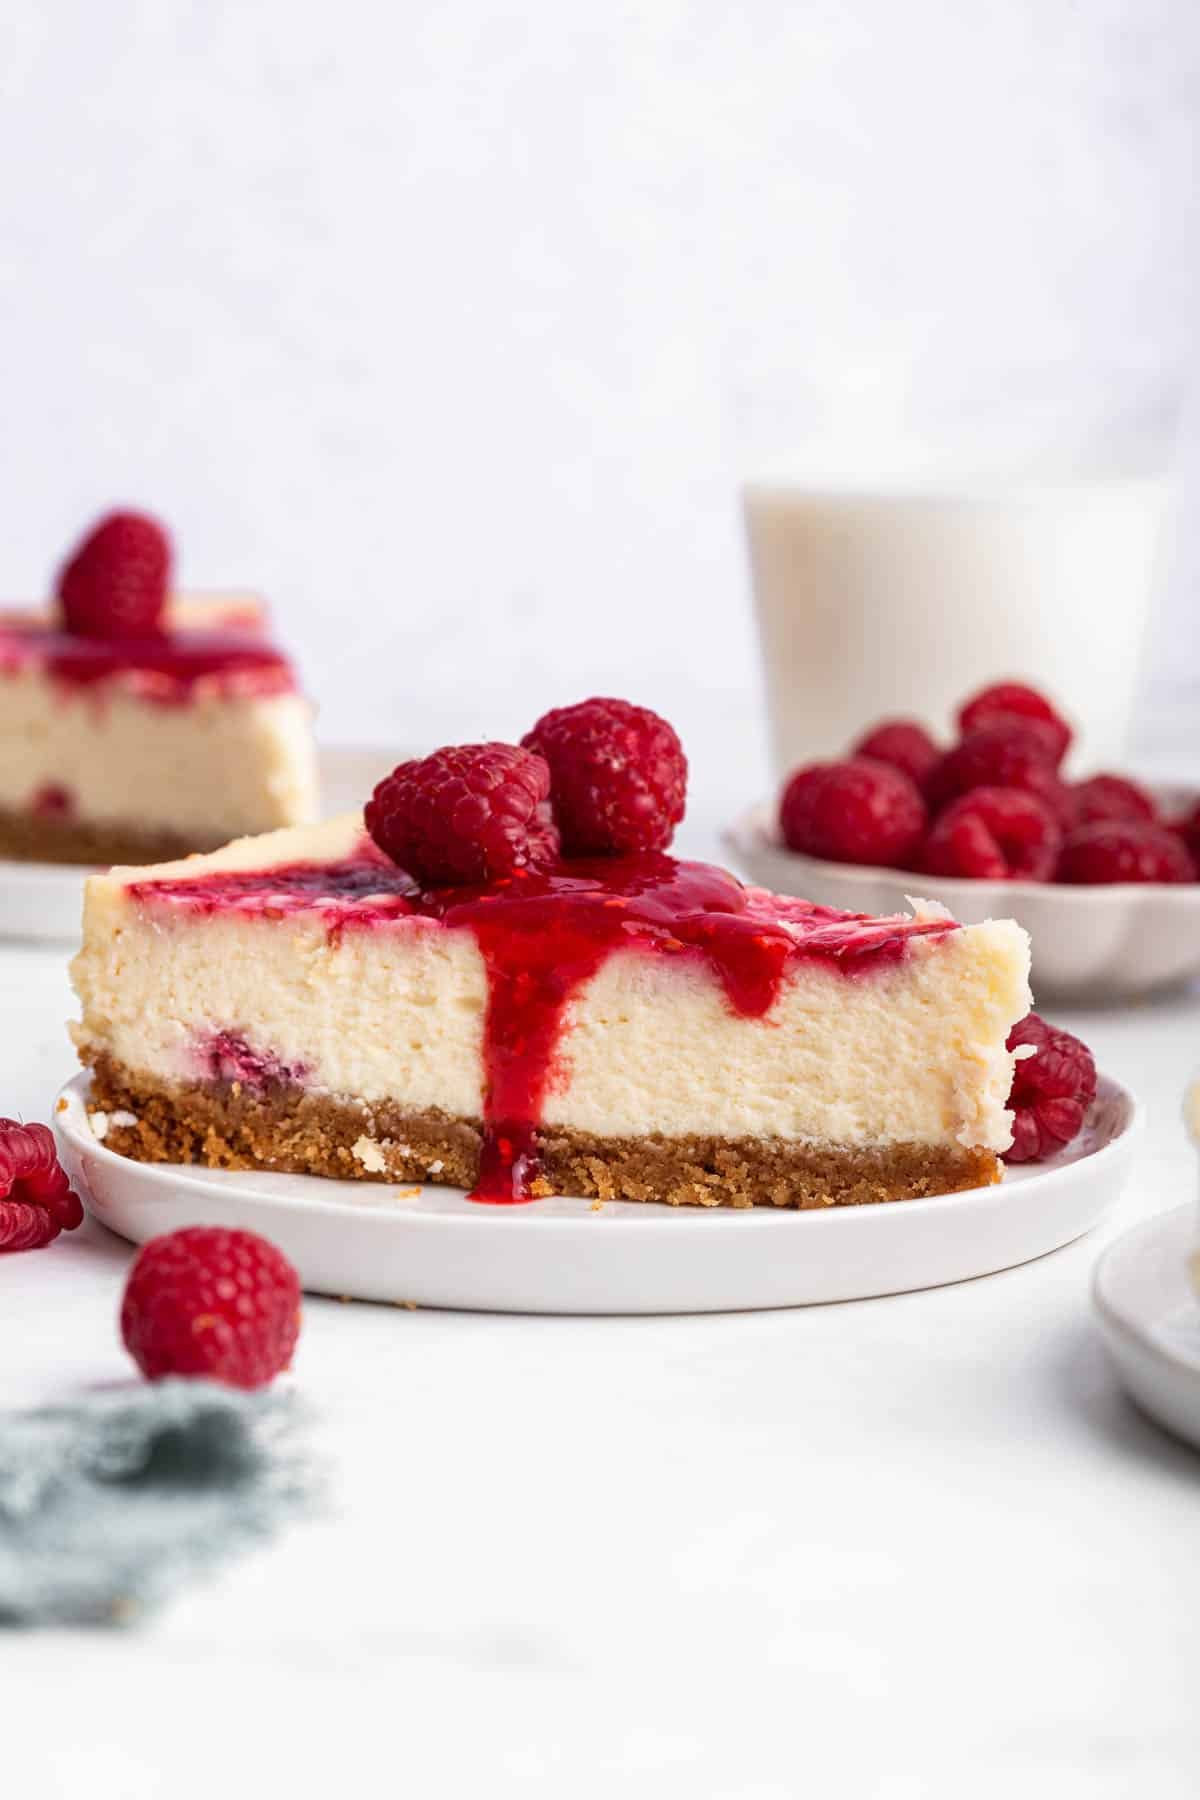 Slice of dessert with graham cracker crust and red berry sauce on top.